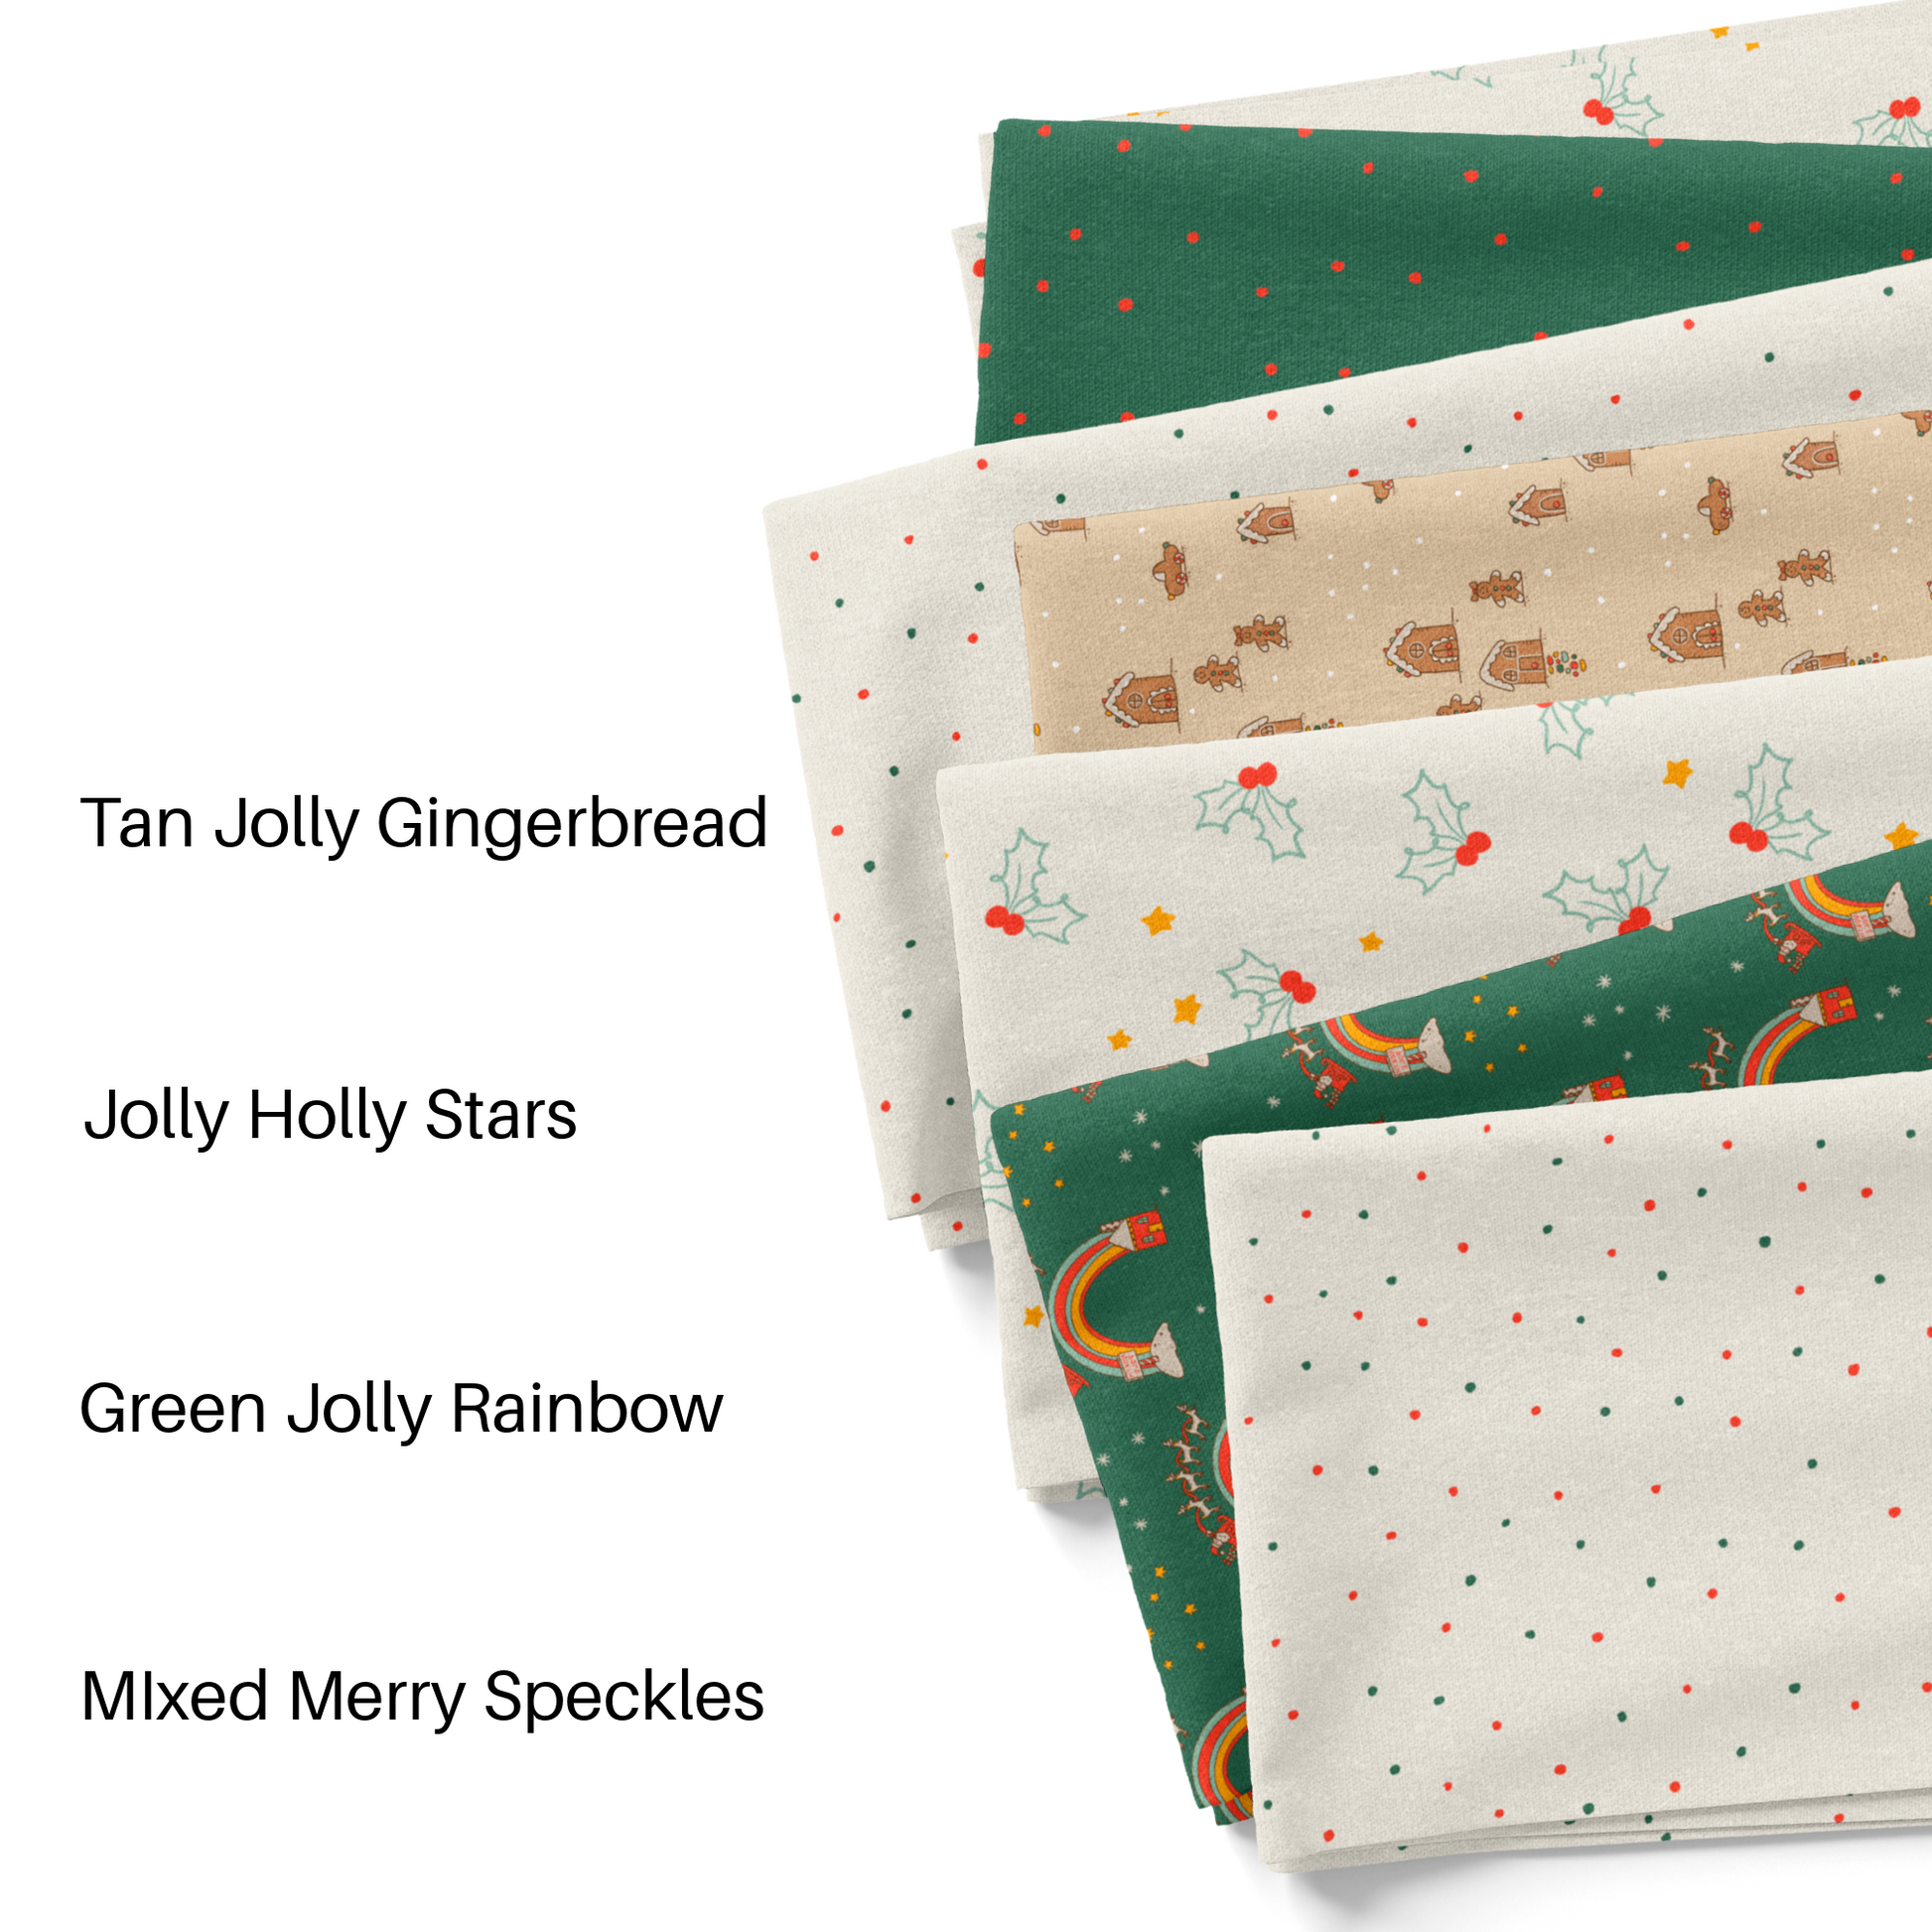 Cream and green Wild Daisy Gallery Christmas collection fabric swatches.